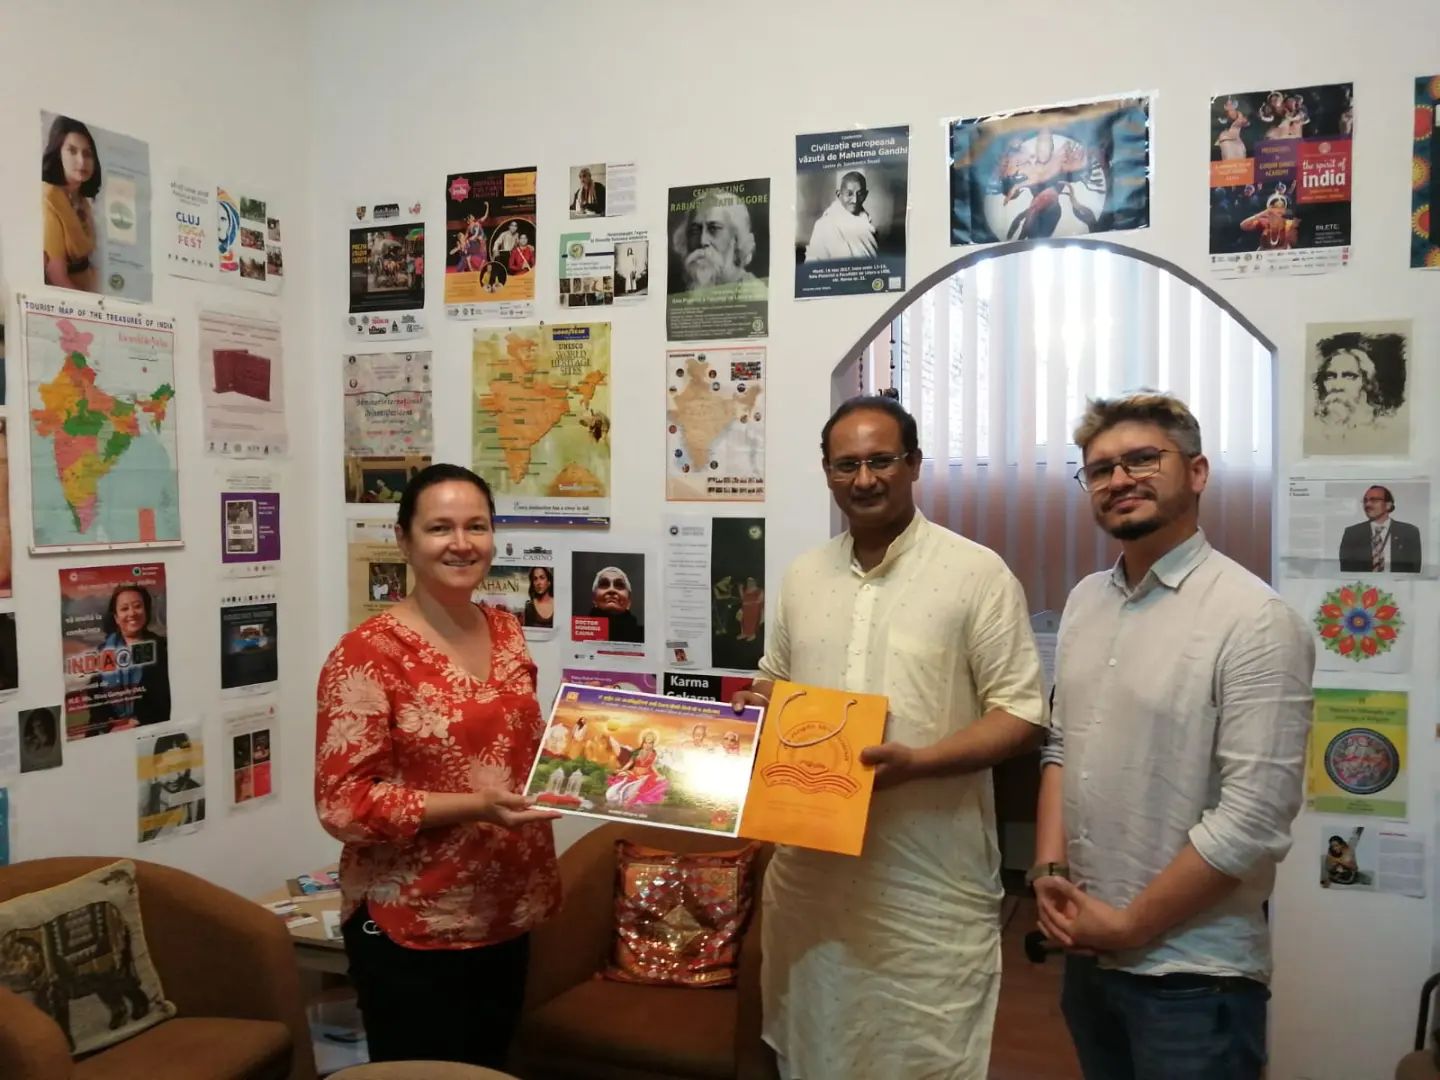 Dr. Chinmay Pandya Ji met the Director at the India Center of Baba Boise University, Cluj, Romina